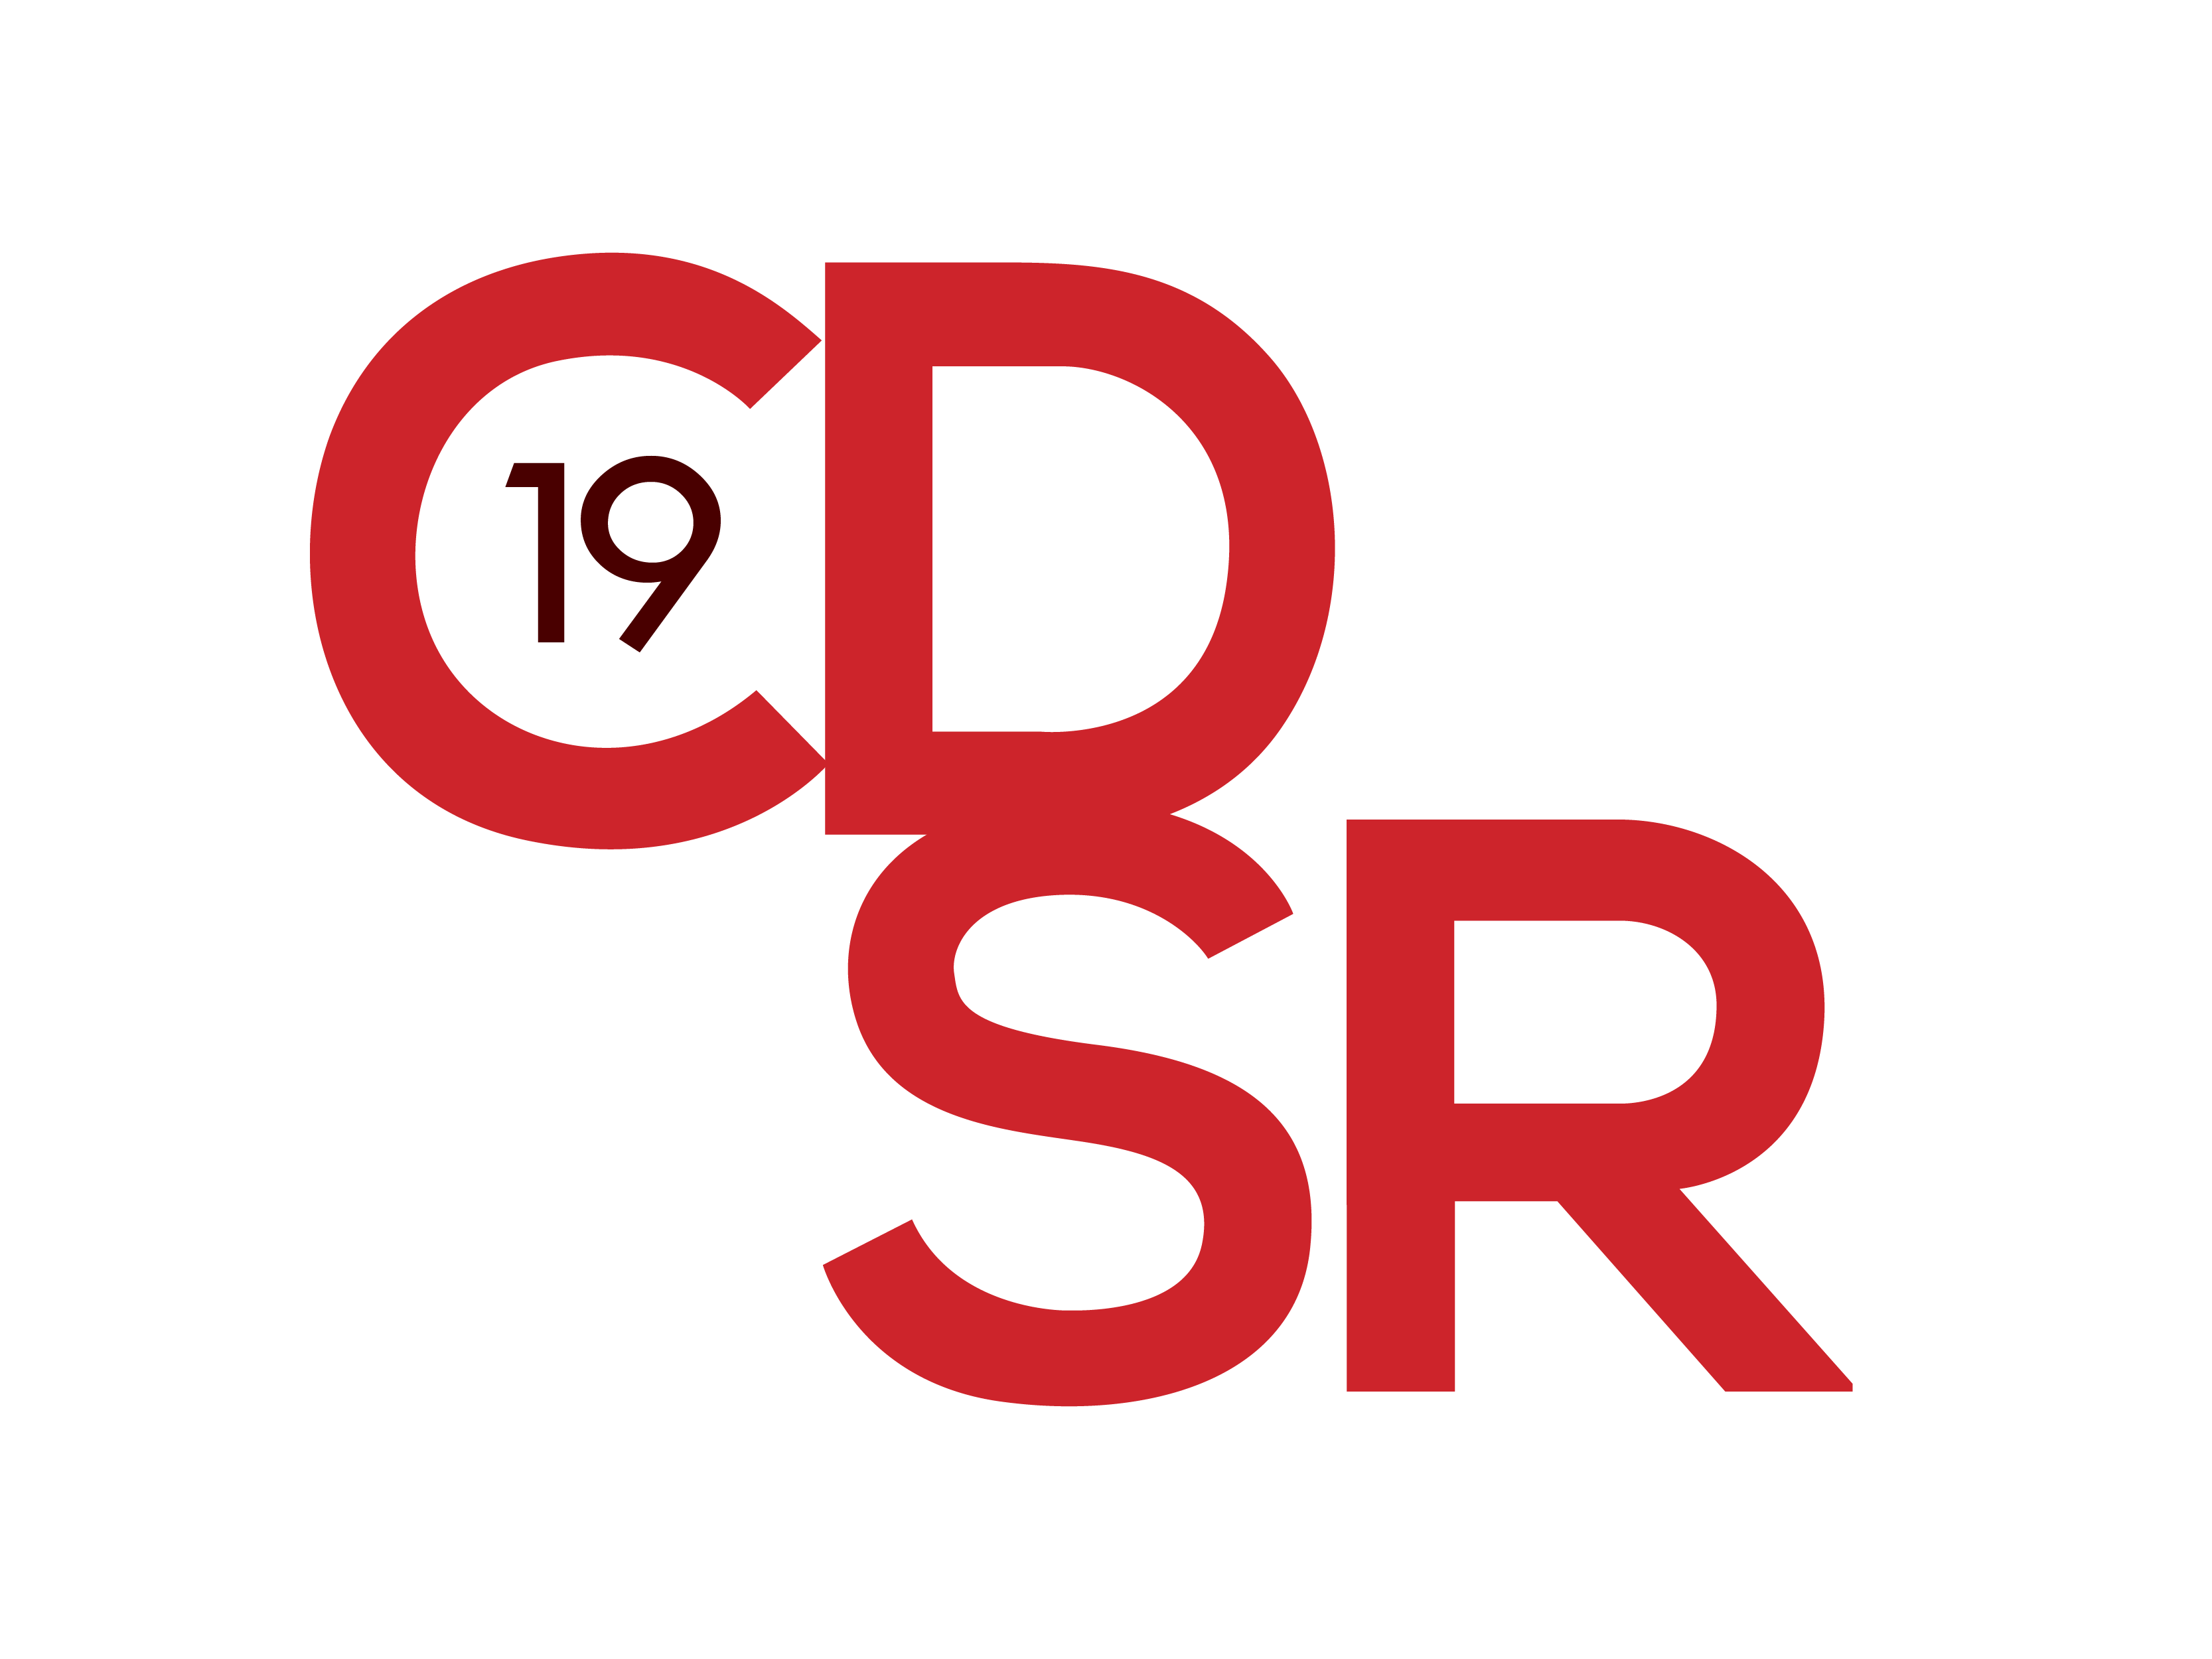 6th International Conference on Control Dynamic Systems, and Robotics (CDSR'19)